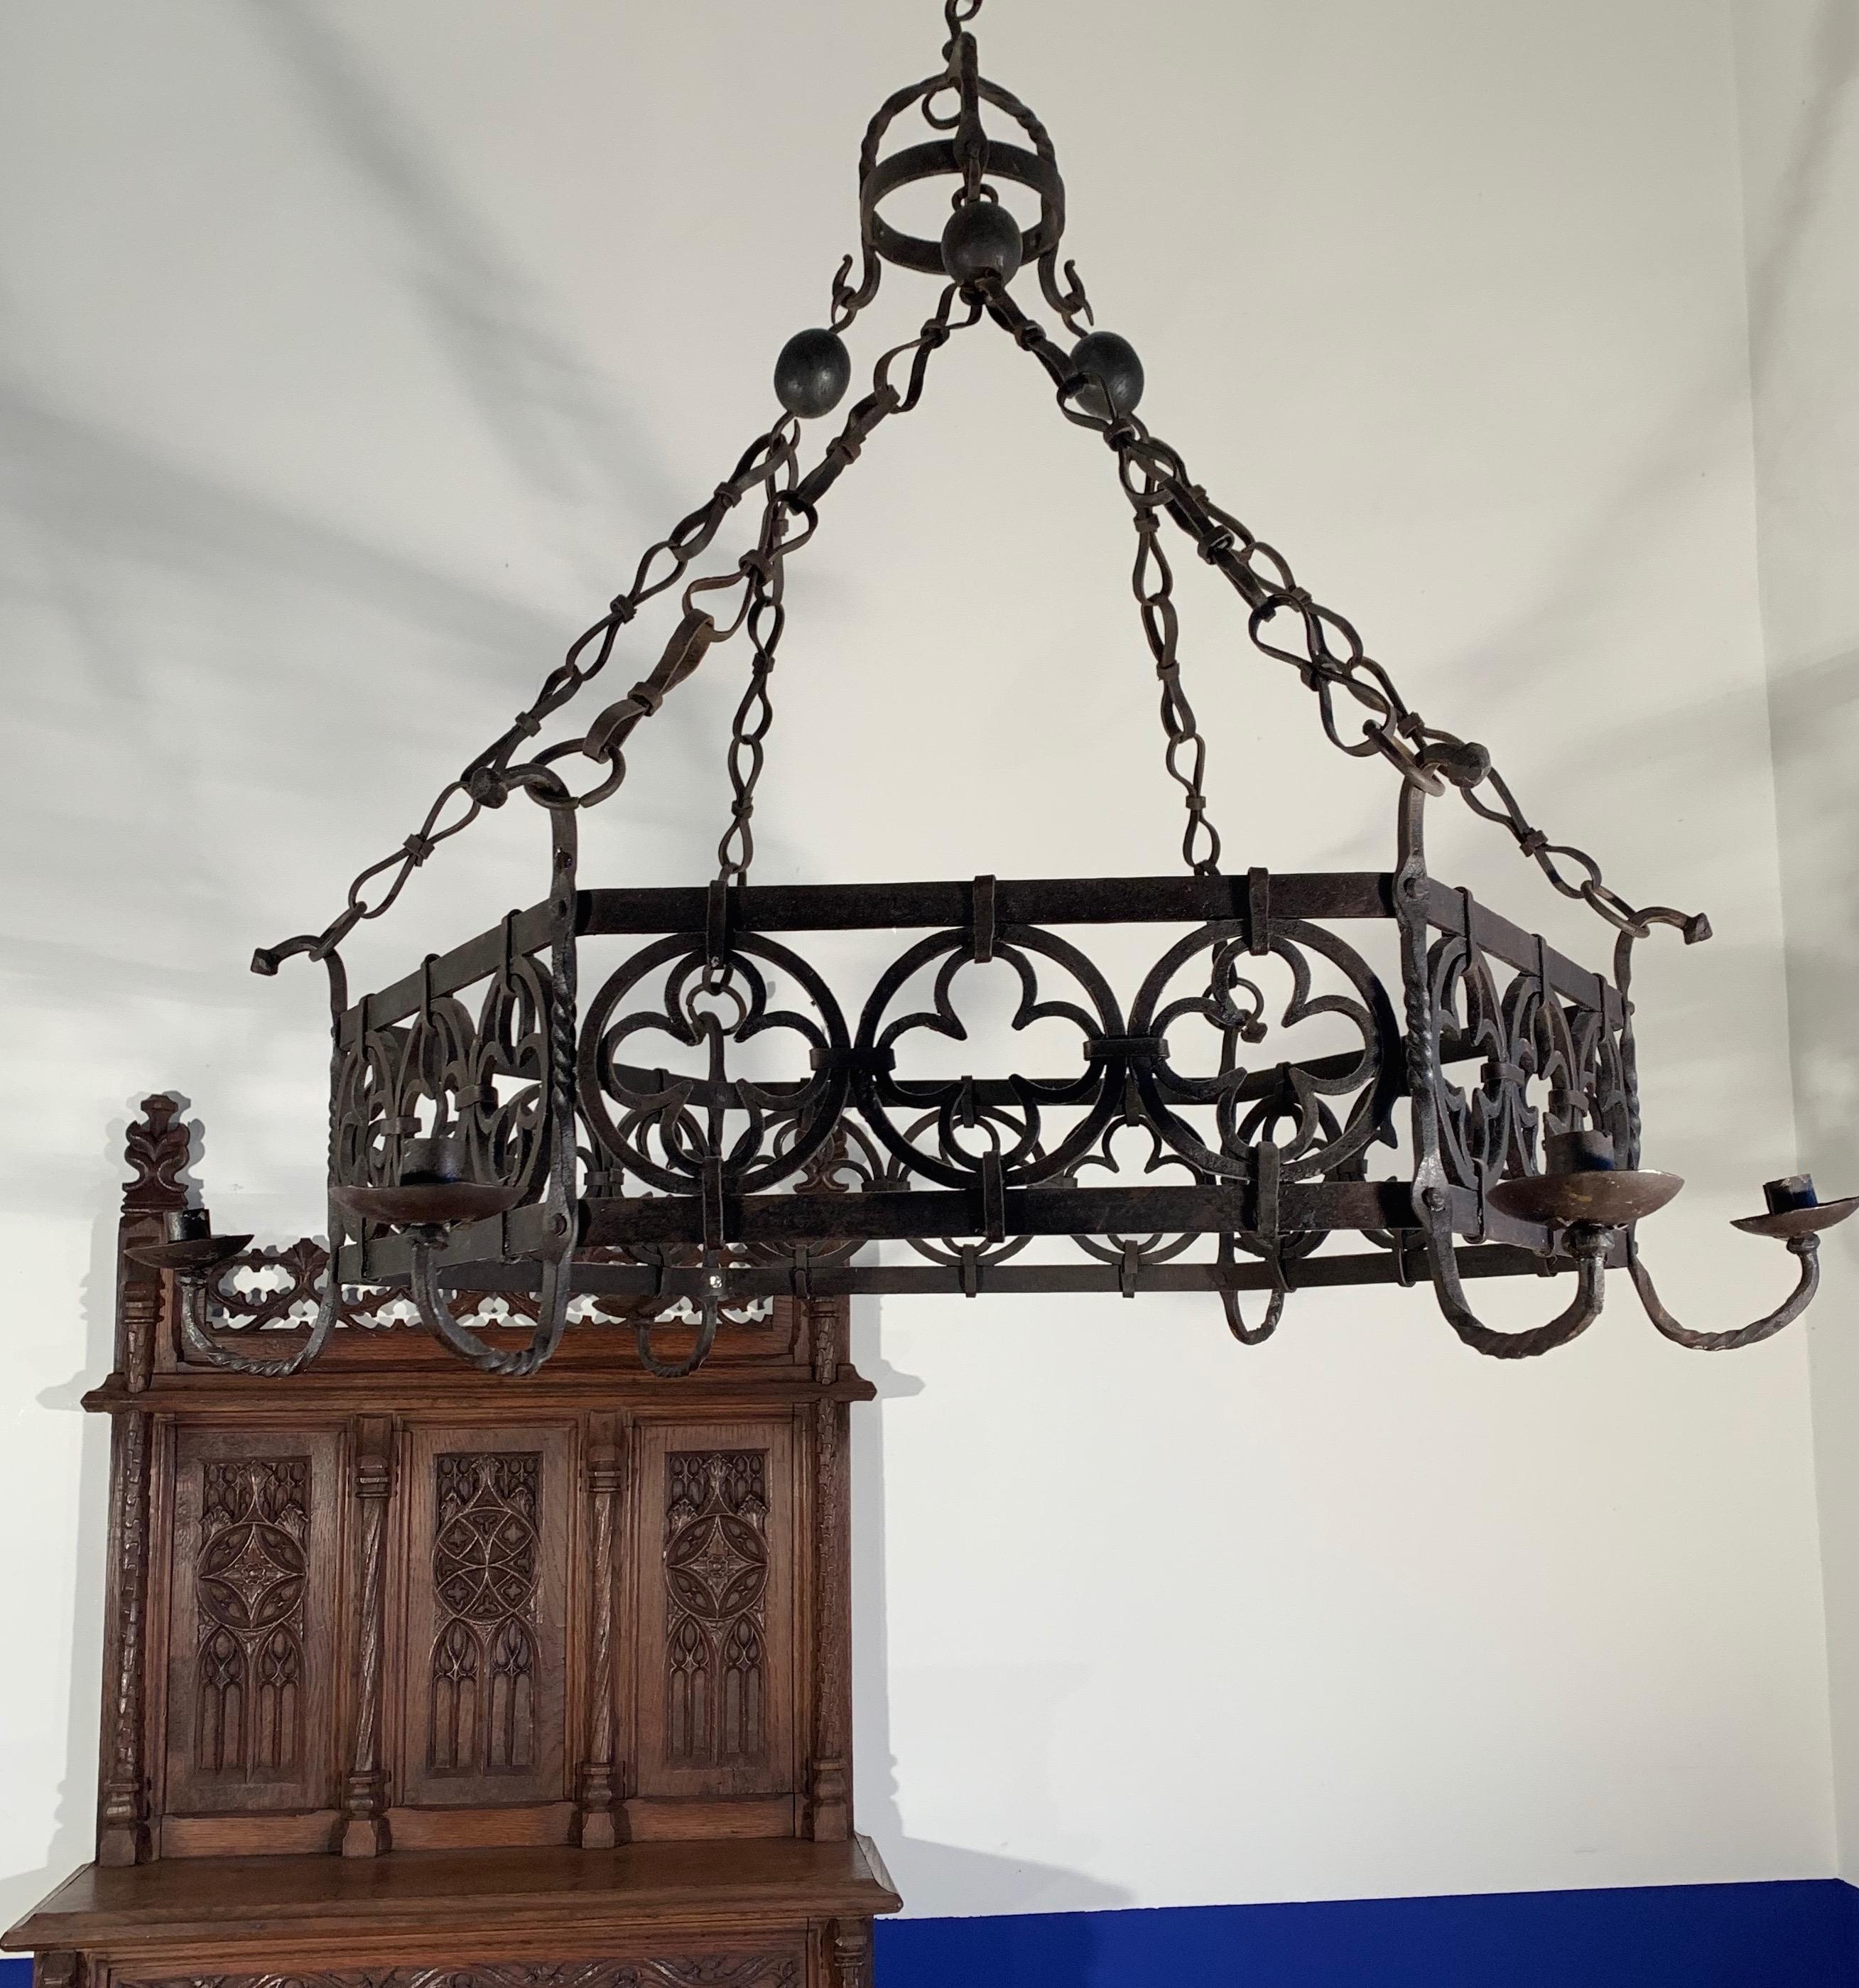 Large Gothic Revival Wrought Iron Chandelier for Dining Room / Restaurant Etc For Sale 8